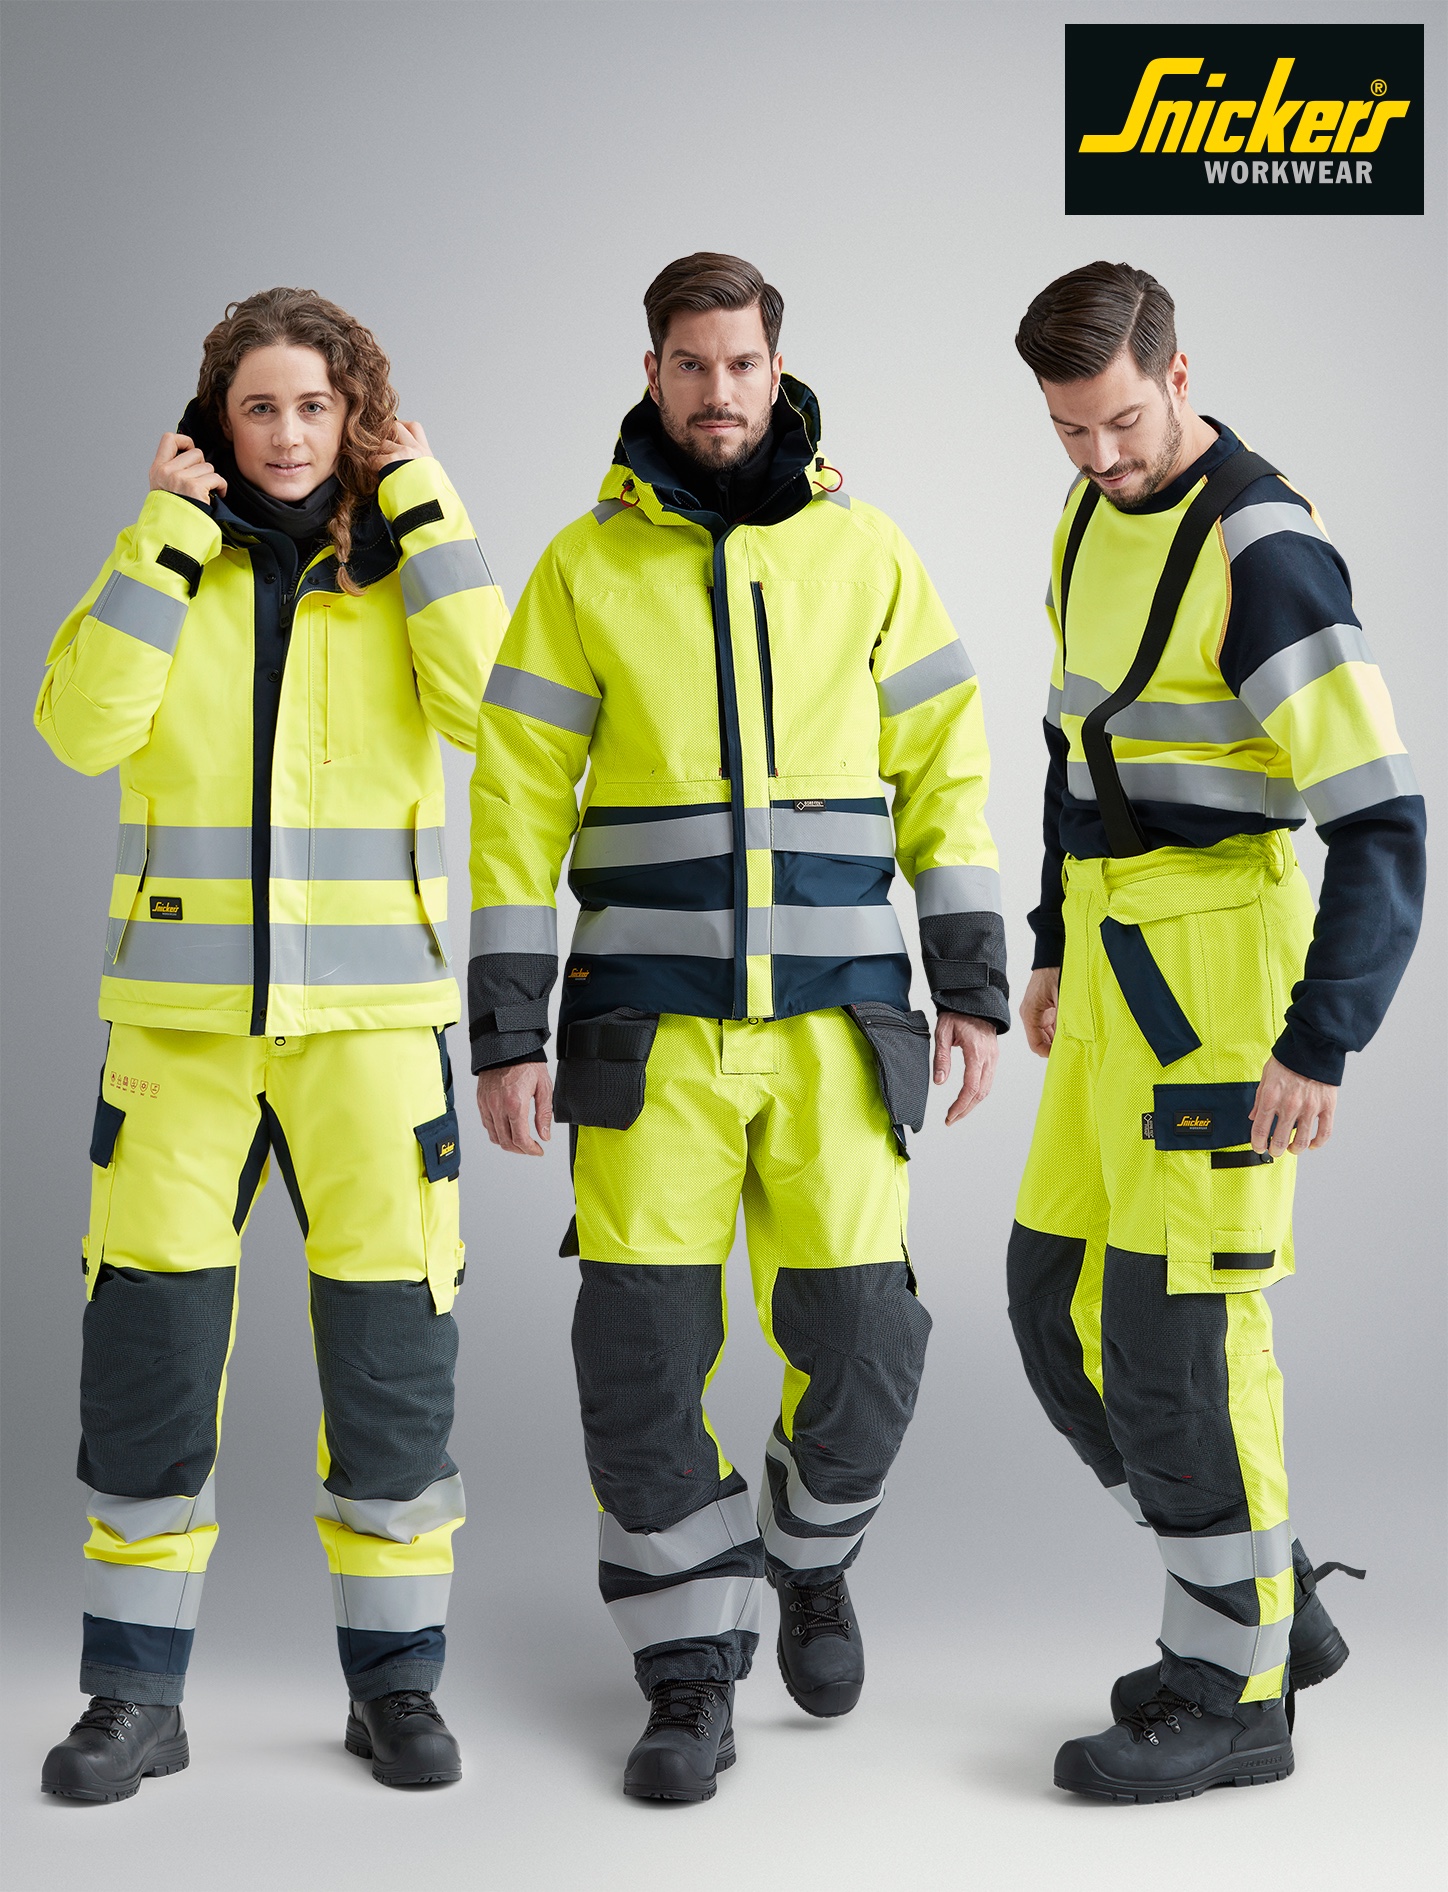 Stay Safe with Snickers Workwear protective wear solutions for Men and ...